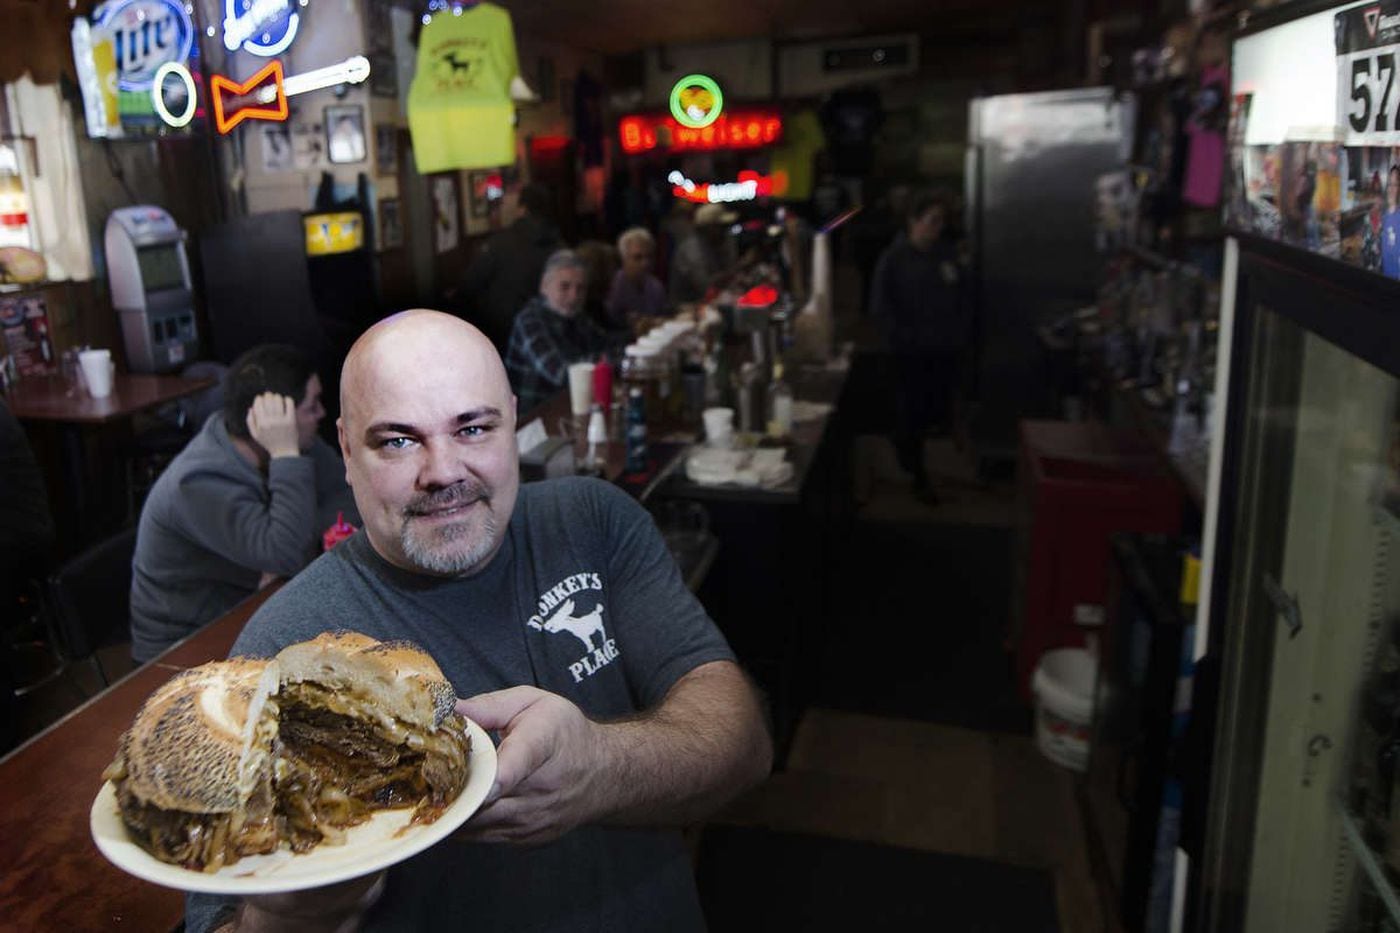 Rob Lucas, third generation owner of Donkey’s Place, shows off a signature Donkey’s cheesesteak.